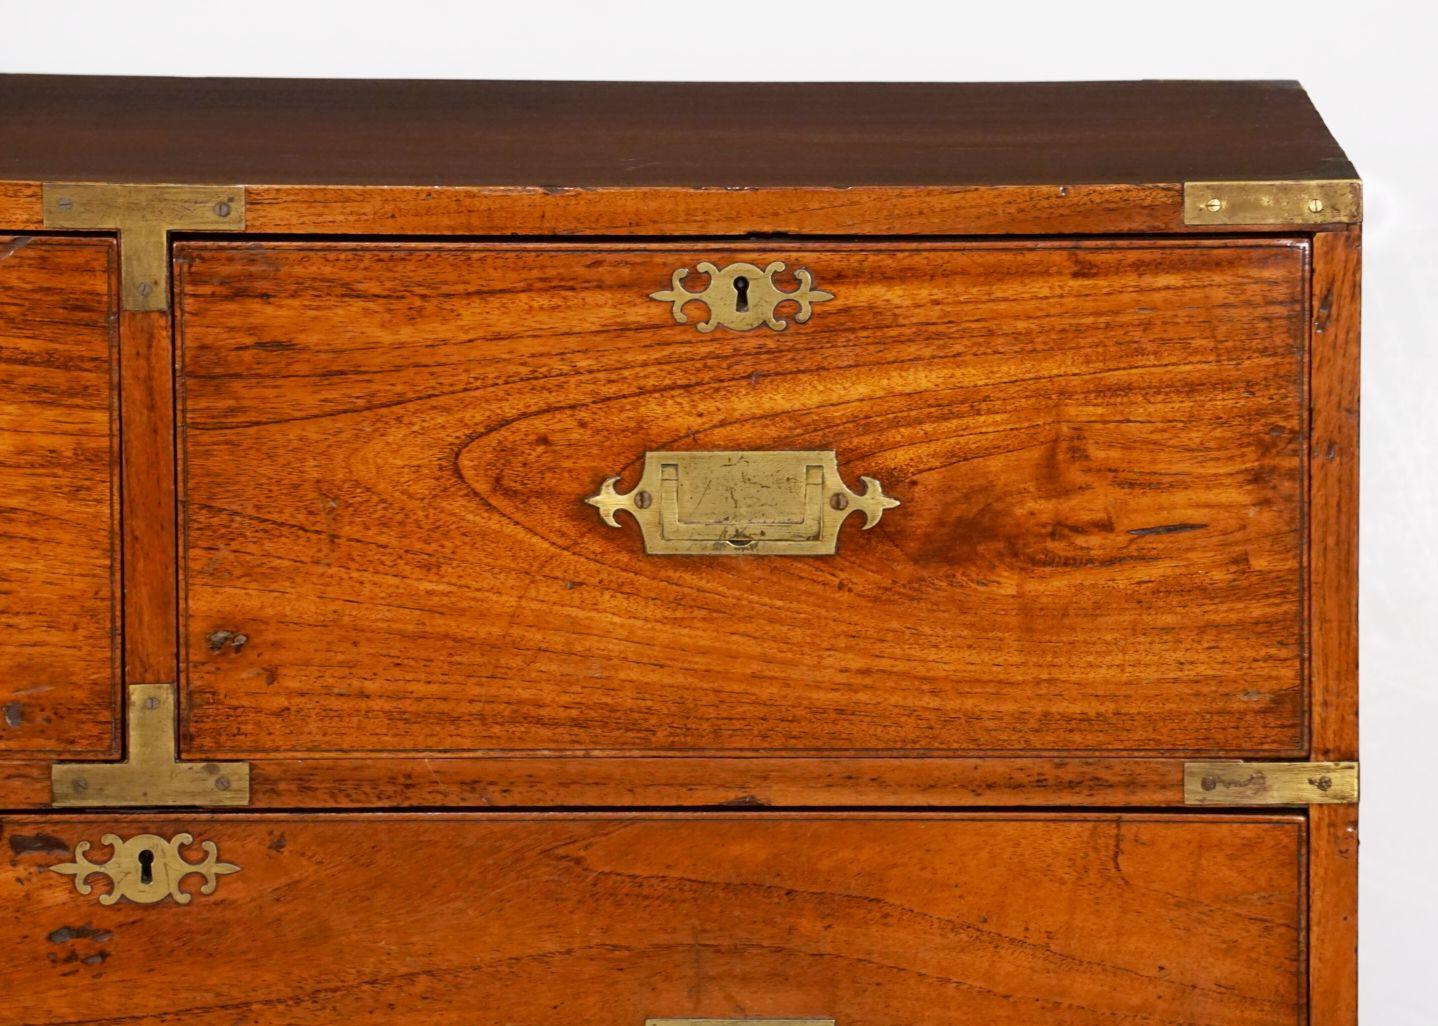 19th Century British Military Officer's Campaign Chest or Dresser of Brass-Bound Mahogany